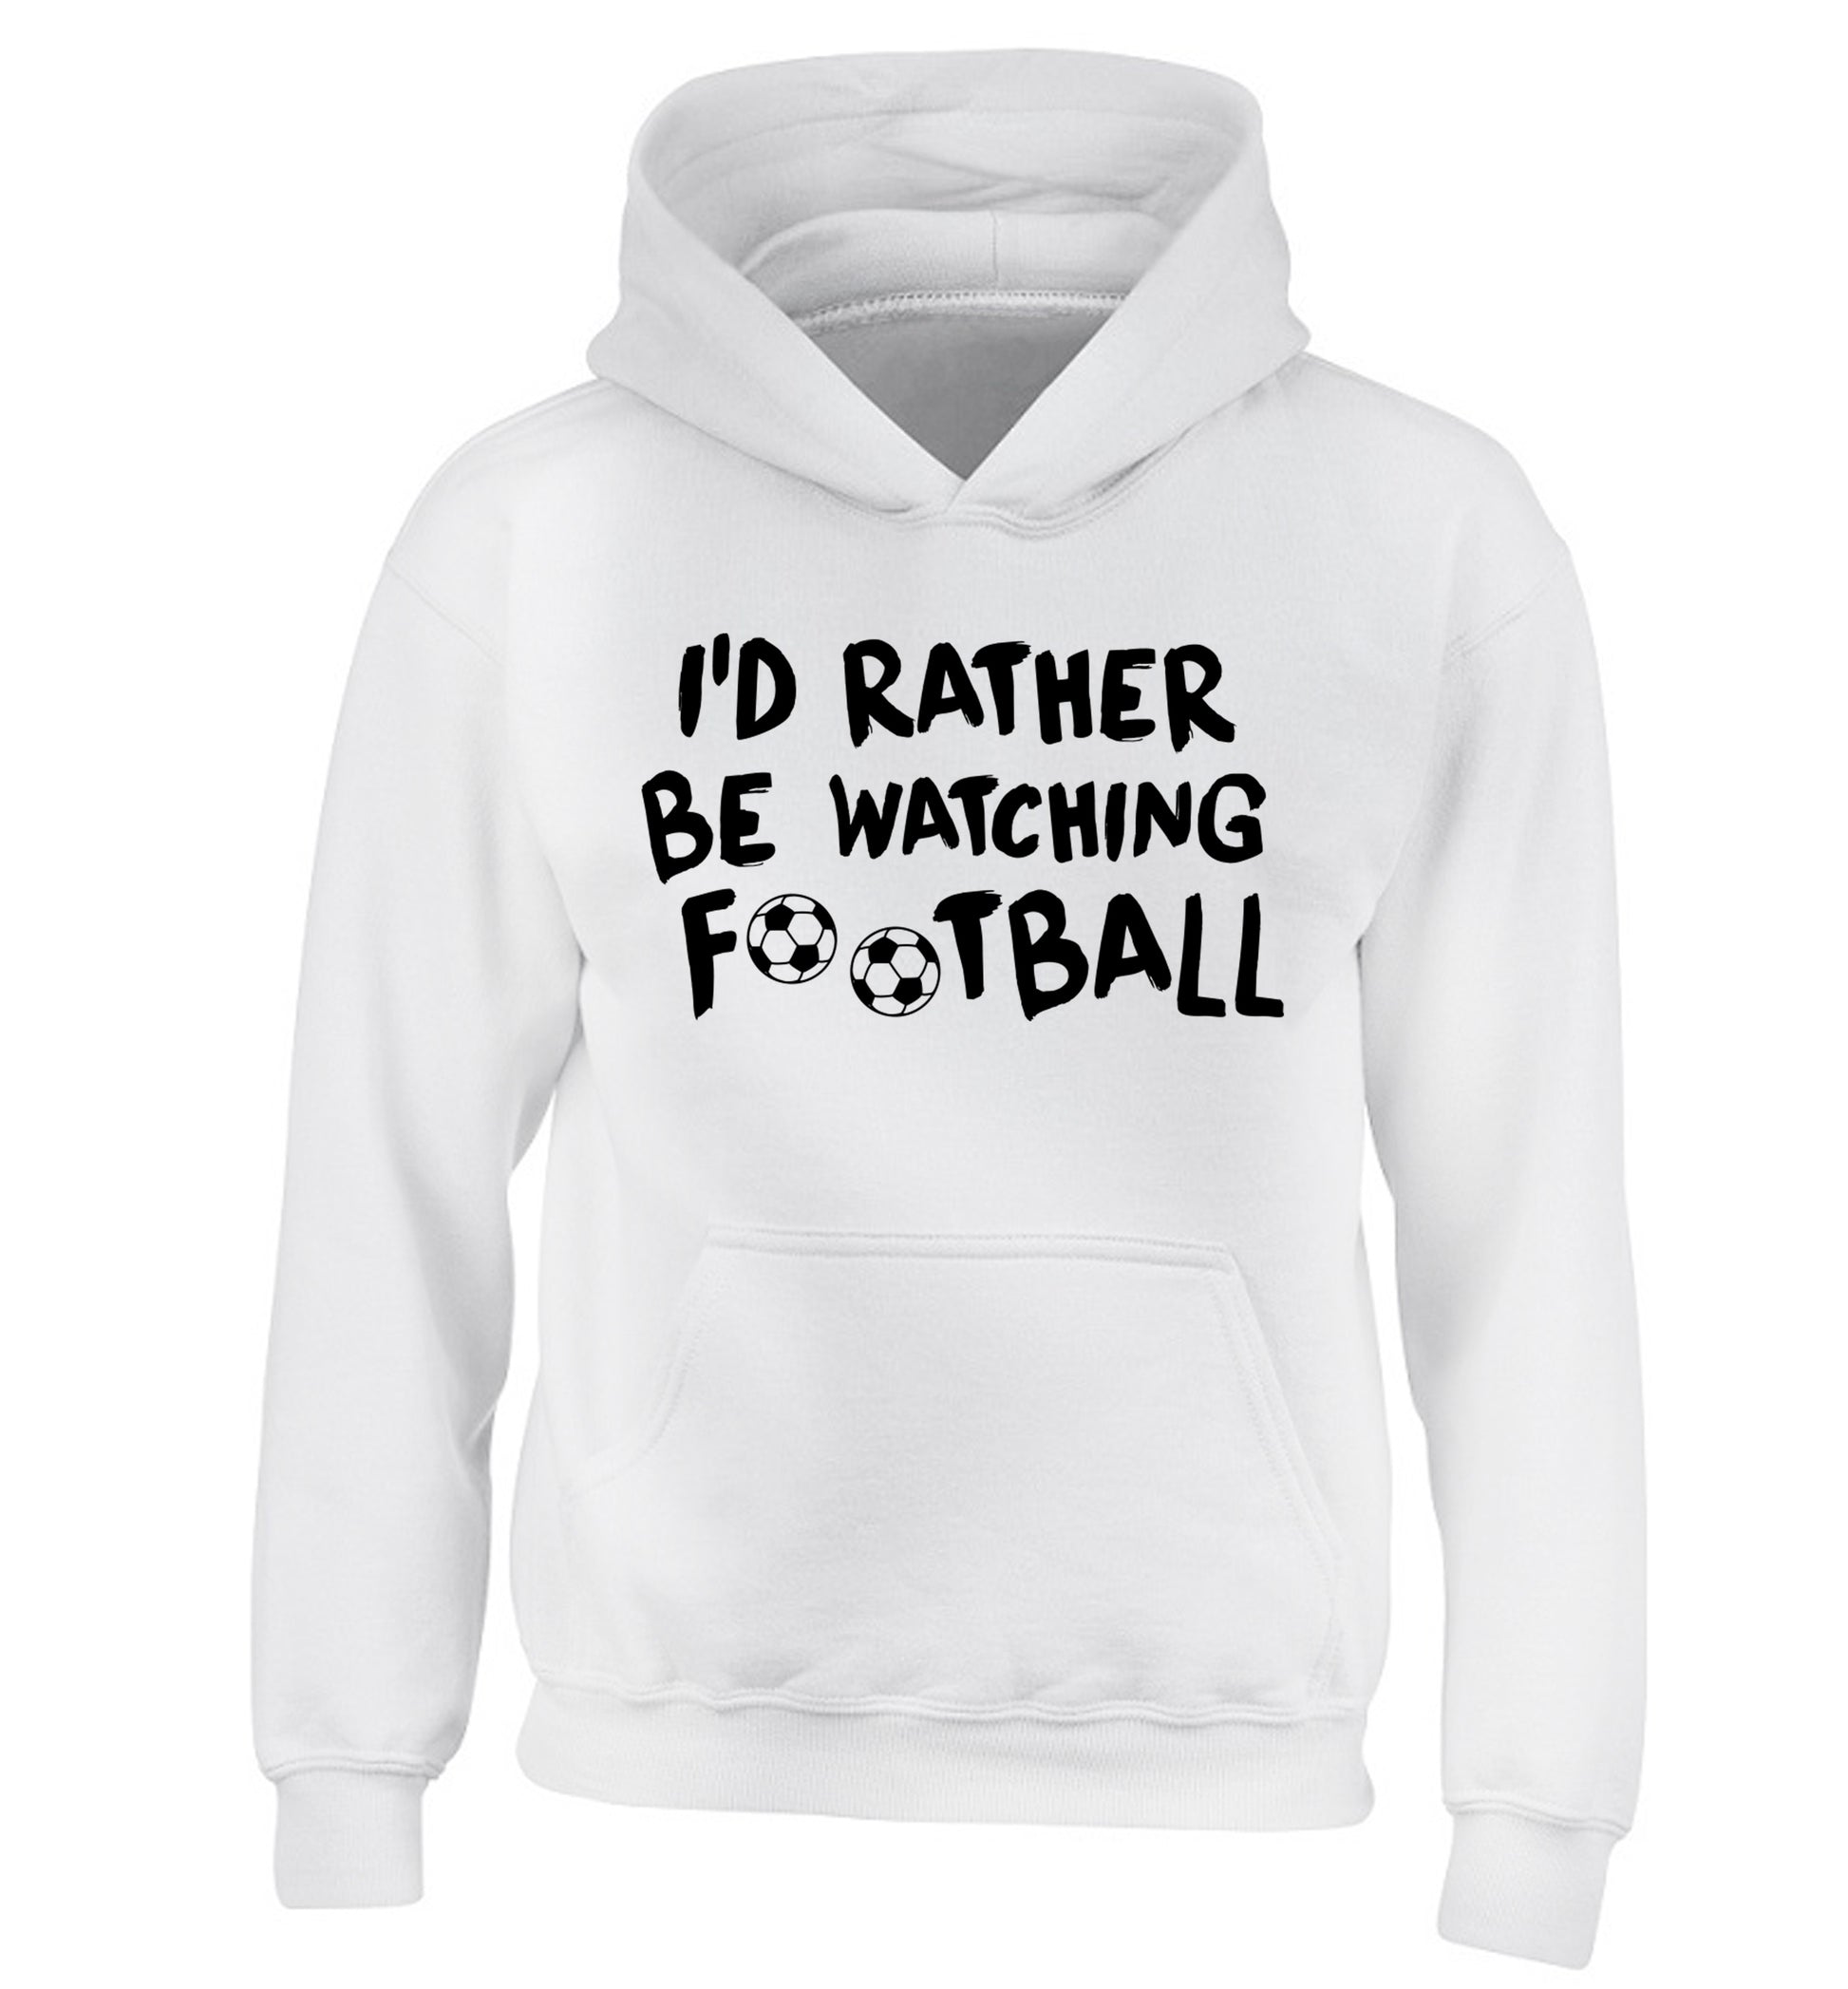 I'd rather be watching football children's white hoodie 12-14 Years